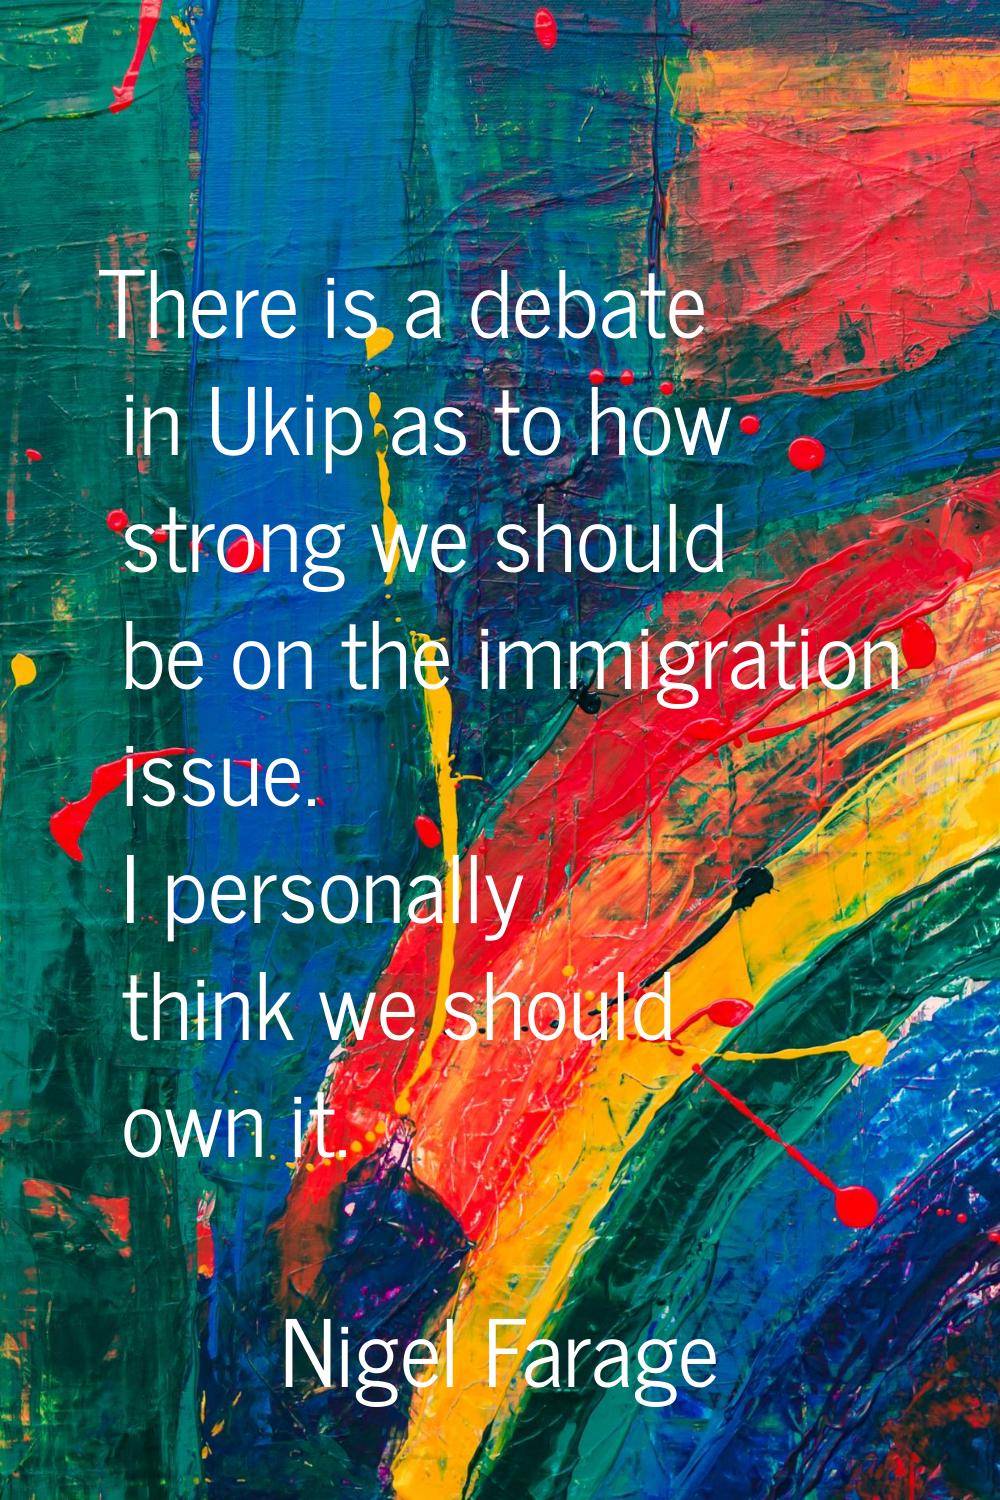 There is a debate in Ukip as to how strong we should be on the immigration issue. I personally thin